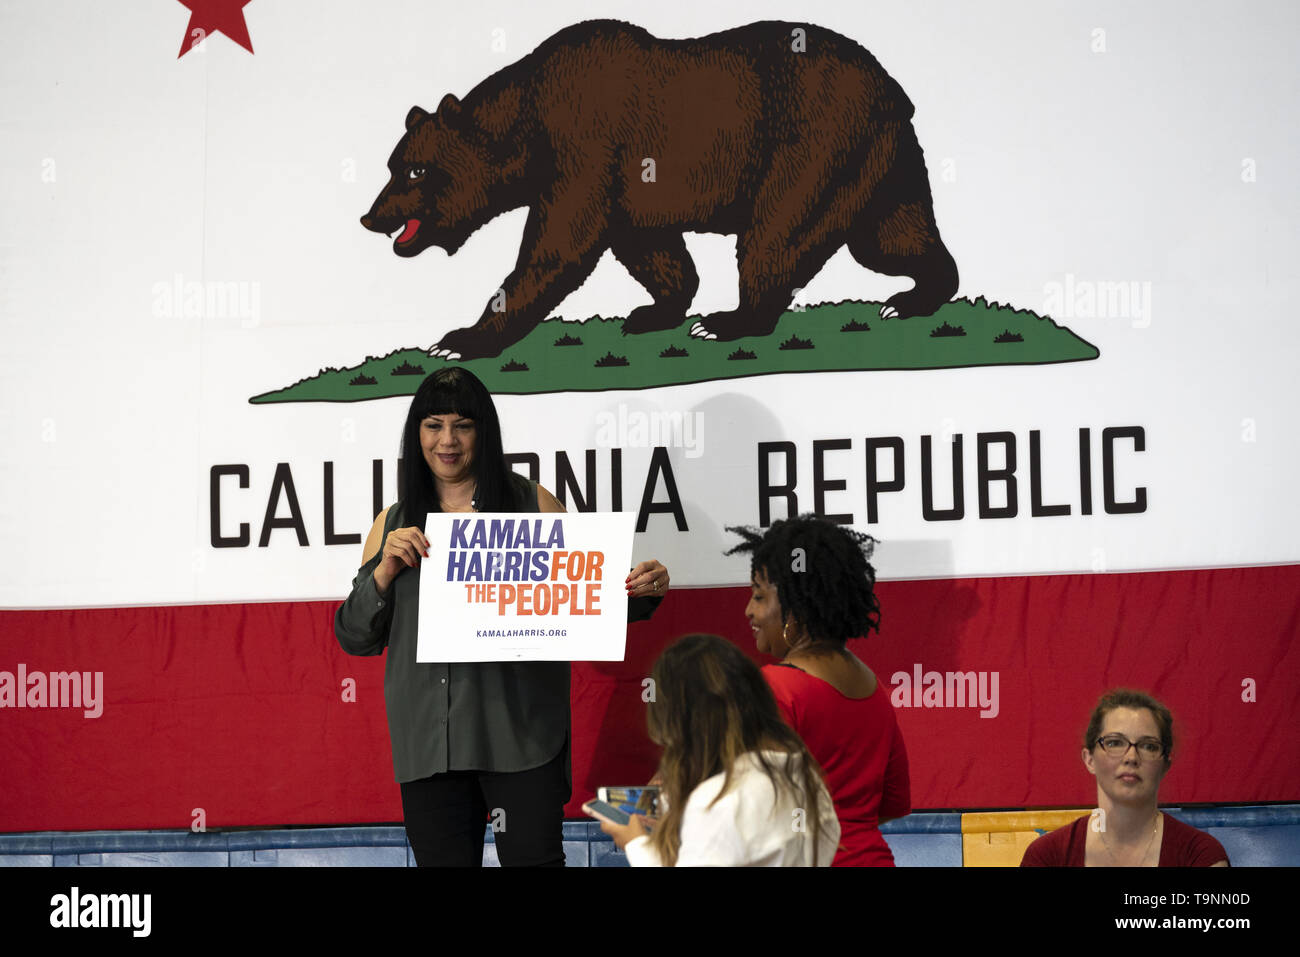 Los Angeles, CA, USA. 23rd Mar, 2019. Supporters of Democratic presidential candidate U.S. Senator Kamala Harris seen holding placards during a campaign rally in Los Angeles. This was Harris's first campaign rally in Los Angeles since she announced her candidacy for the President of the United States. The candidate spoke about the need to combat gun violence, raise teacher pay and provide middle class tax relief. Credit: Ronen Tivony/SOPA Images/ZUMA Wire/Alamy Live News Stock Photo